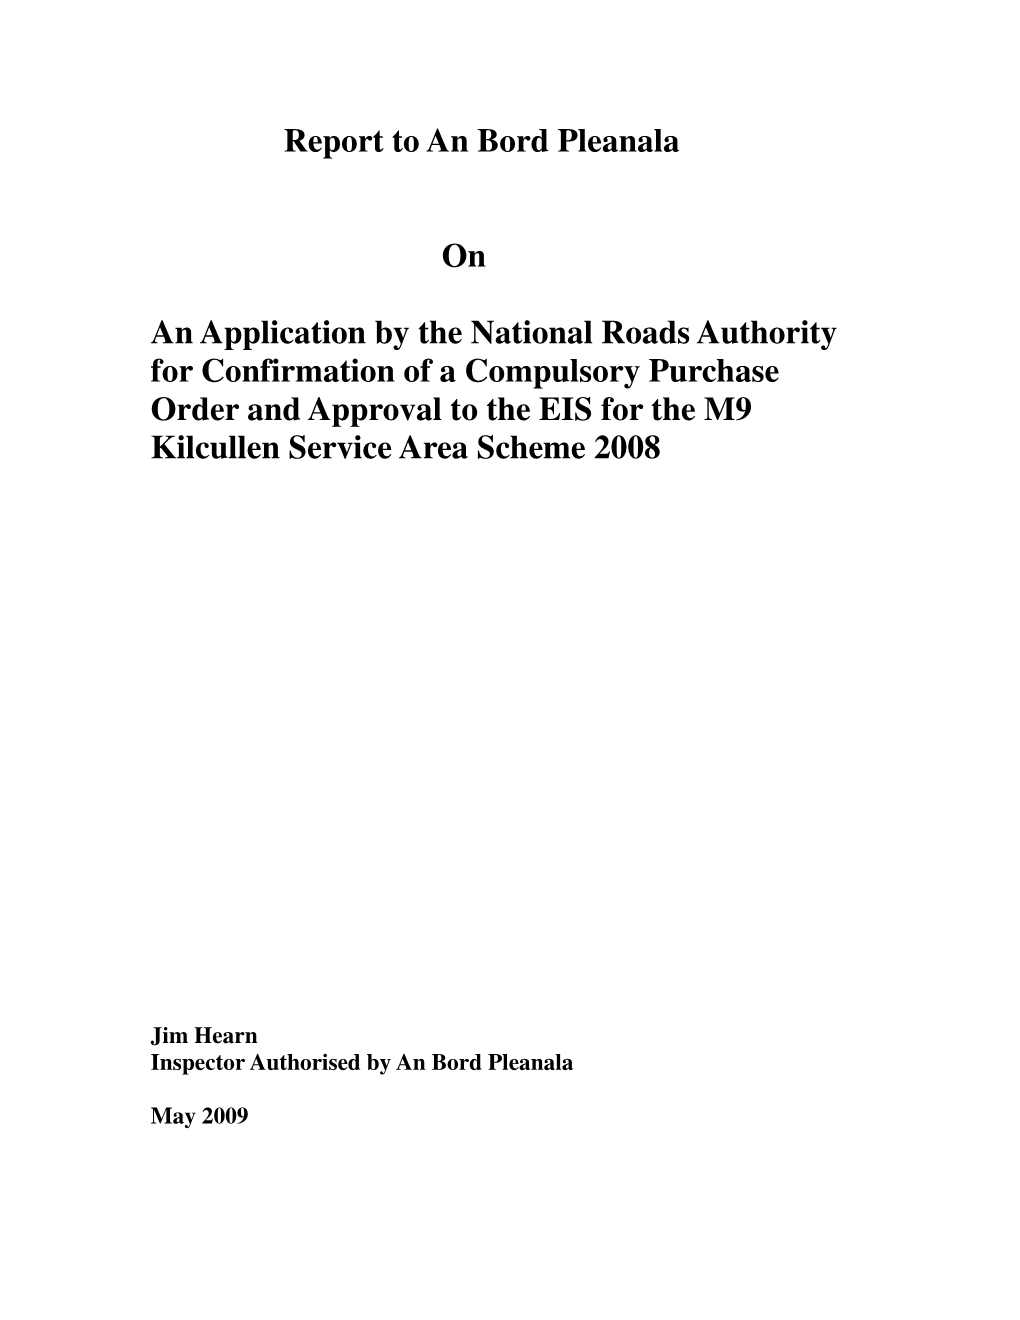 Report to an Bord Pleanala on an Application by the National Roads Authority for Confirmation of a Compulsory Purchase Order